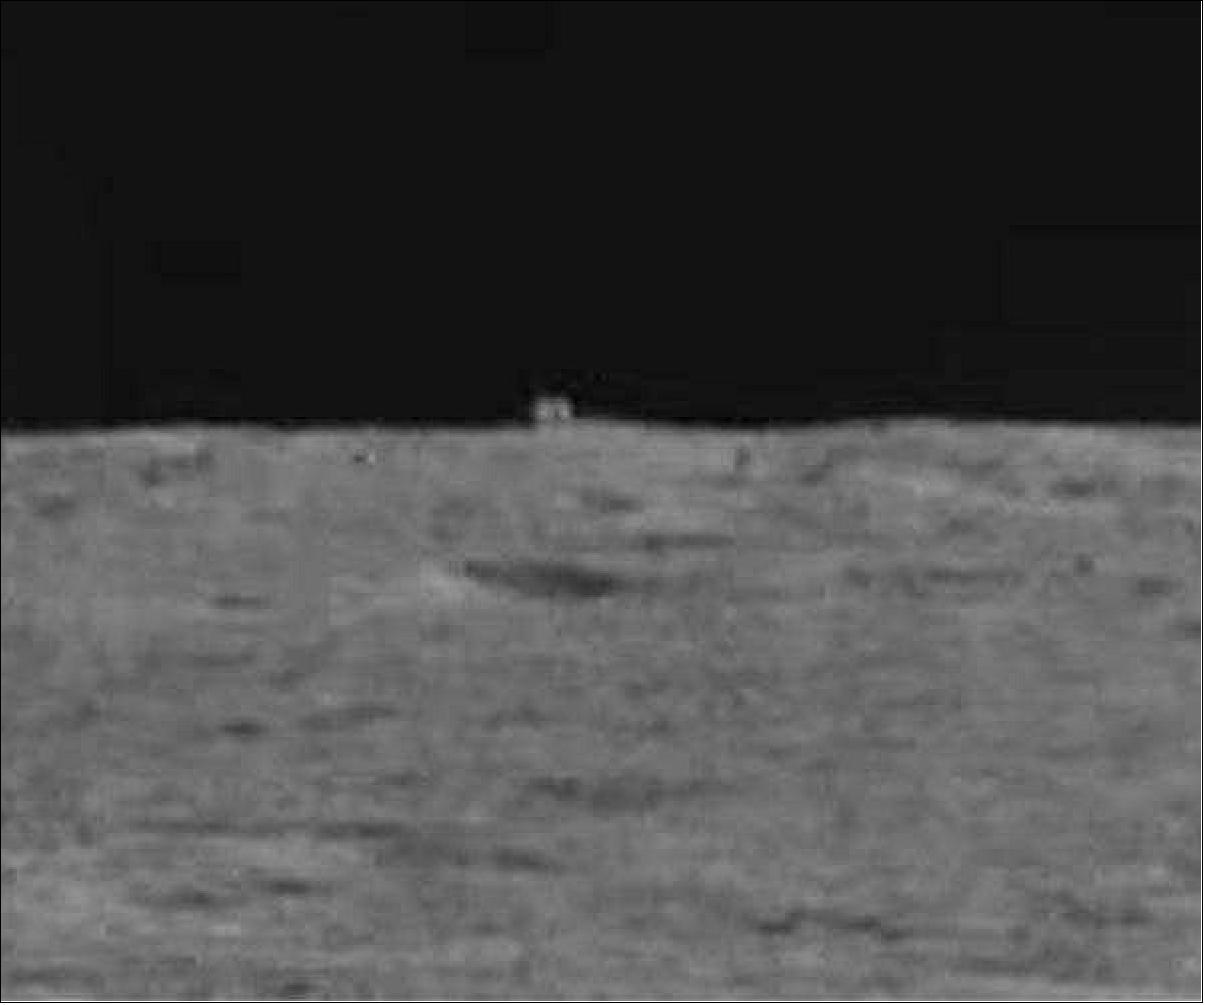 Figure 12: Yutu 2, the lander and rover of the Chang'e-4 probe, captured an obscure but intriguing image about 80 meters from its location during the mission's 36th lunar day, according to Our Space, a Chinese science channel that published the machine's latest diary on Dec 3 (Photo/Our Space)